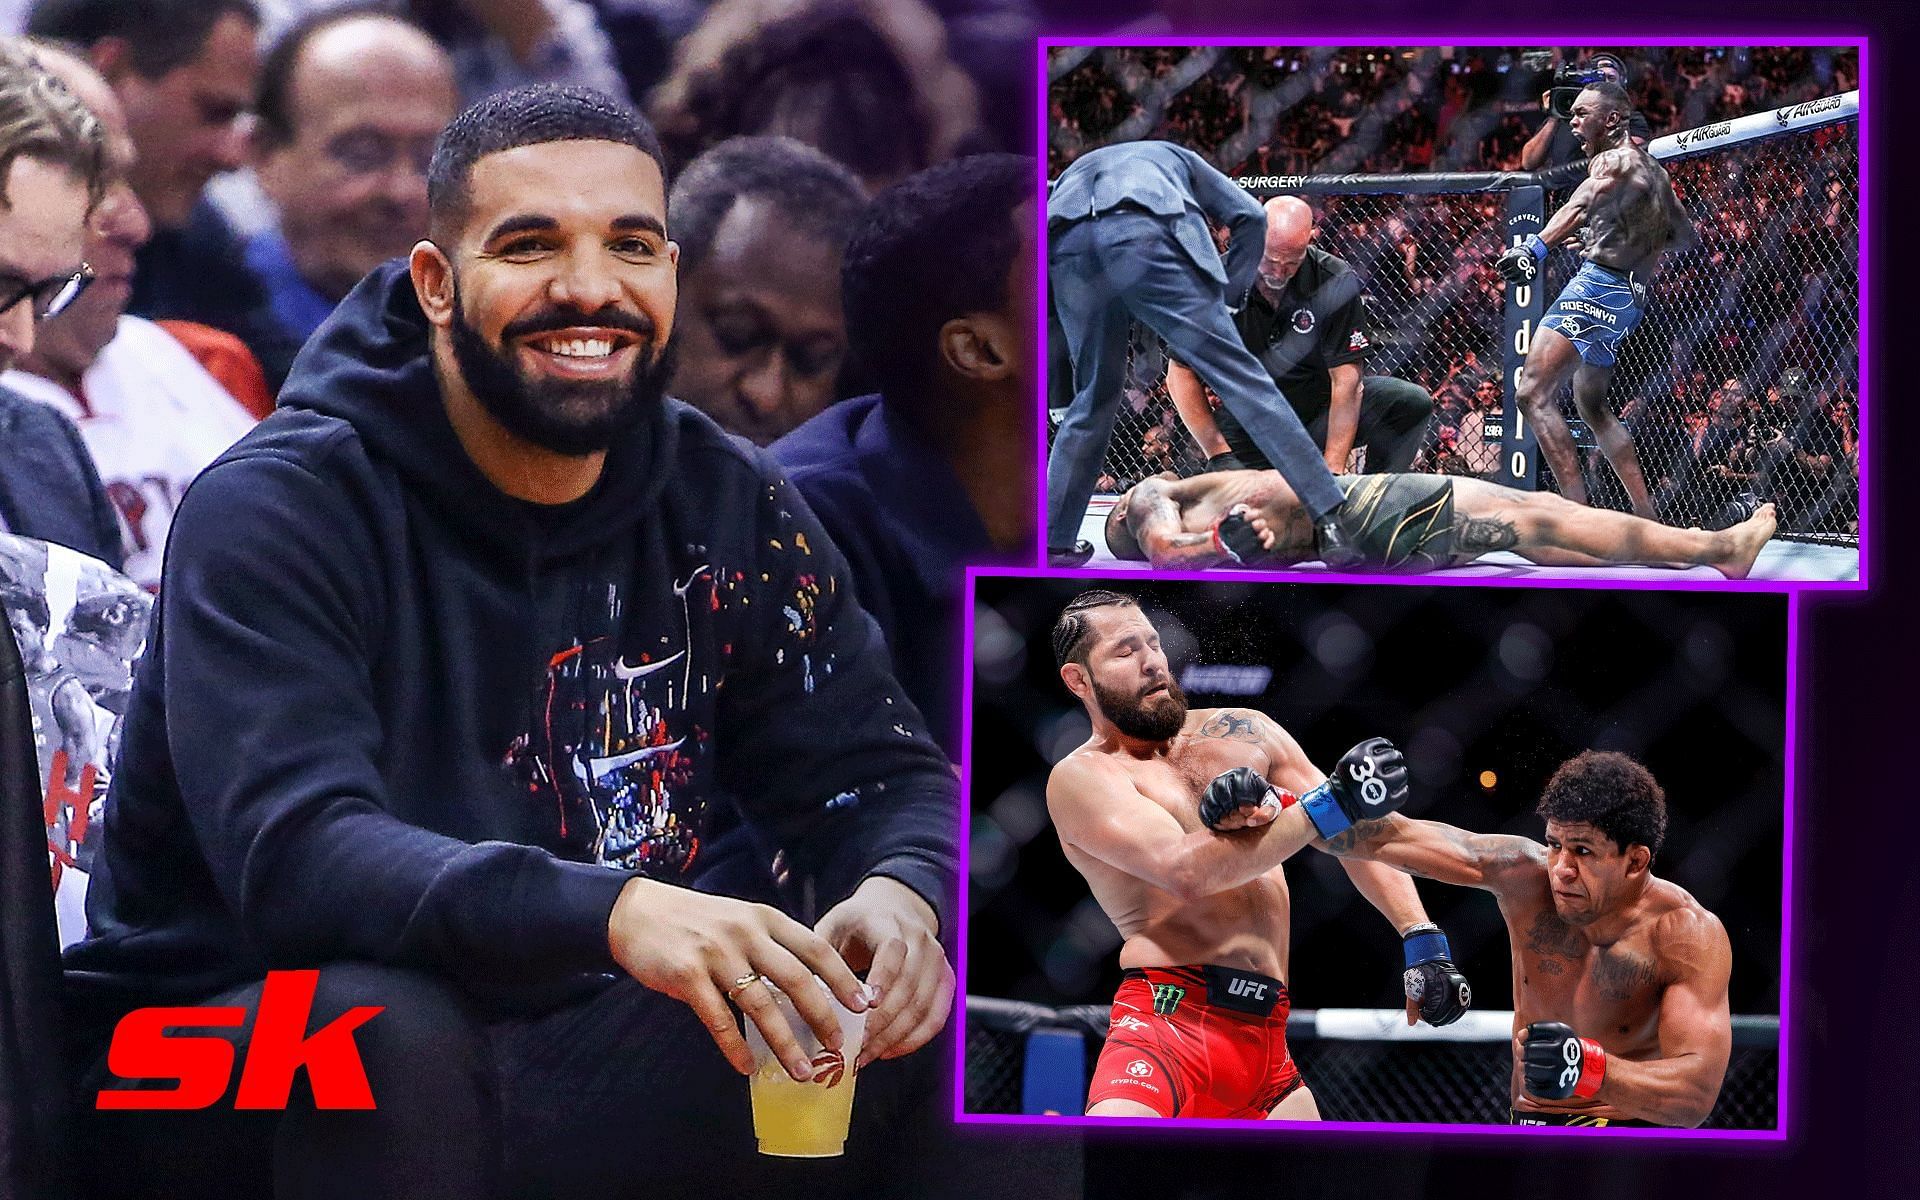 Drake (right) UFC 287 fight pics (right) [Image courtesy @UFC on Instagram]